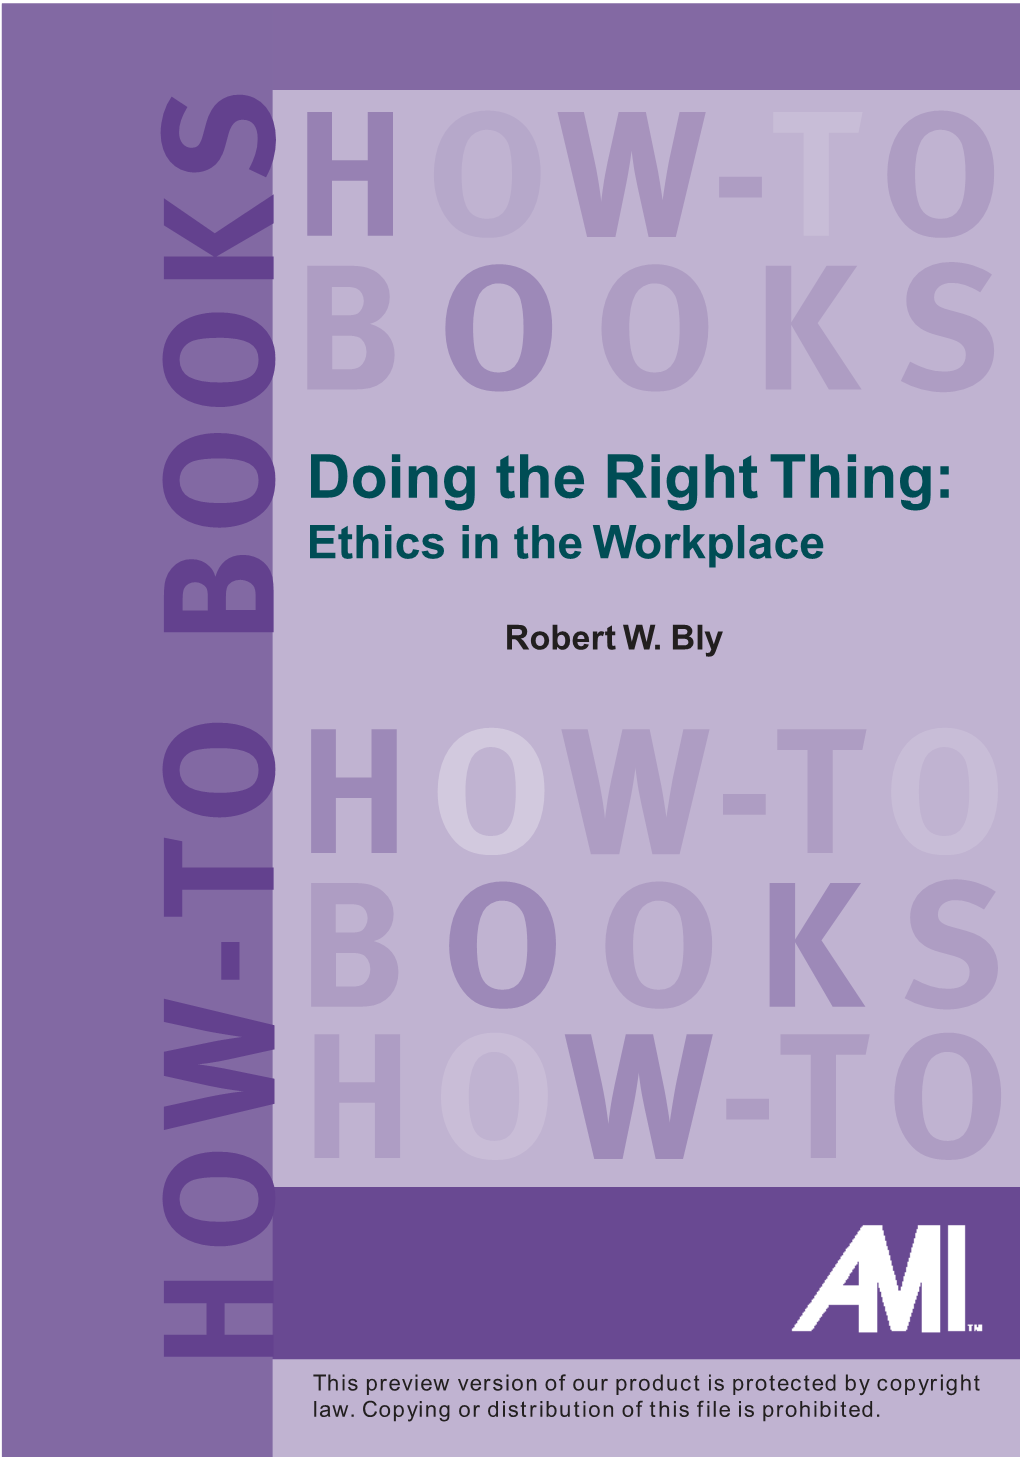 Doing the Right Thing: Ethics in the Workplace